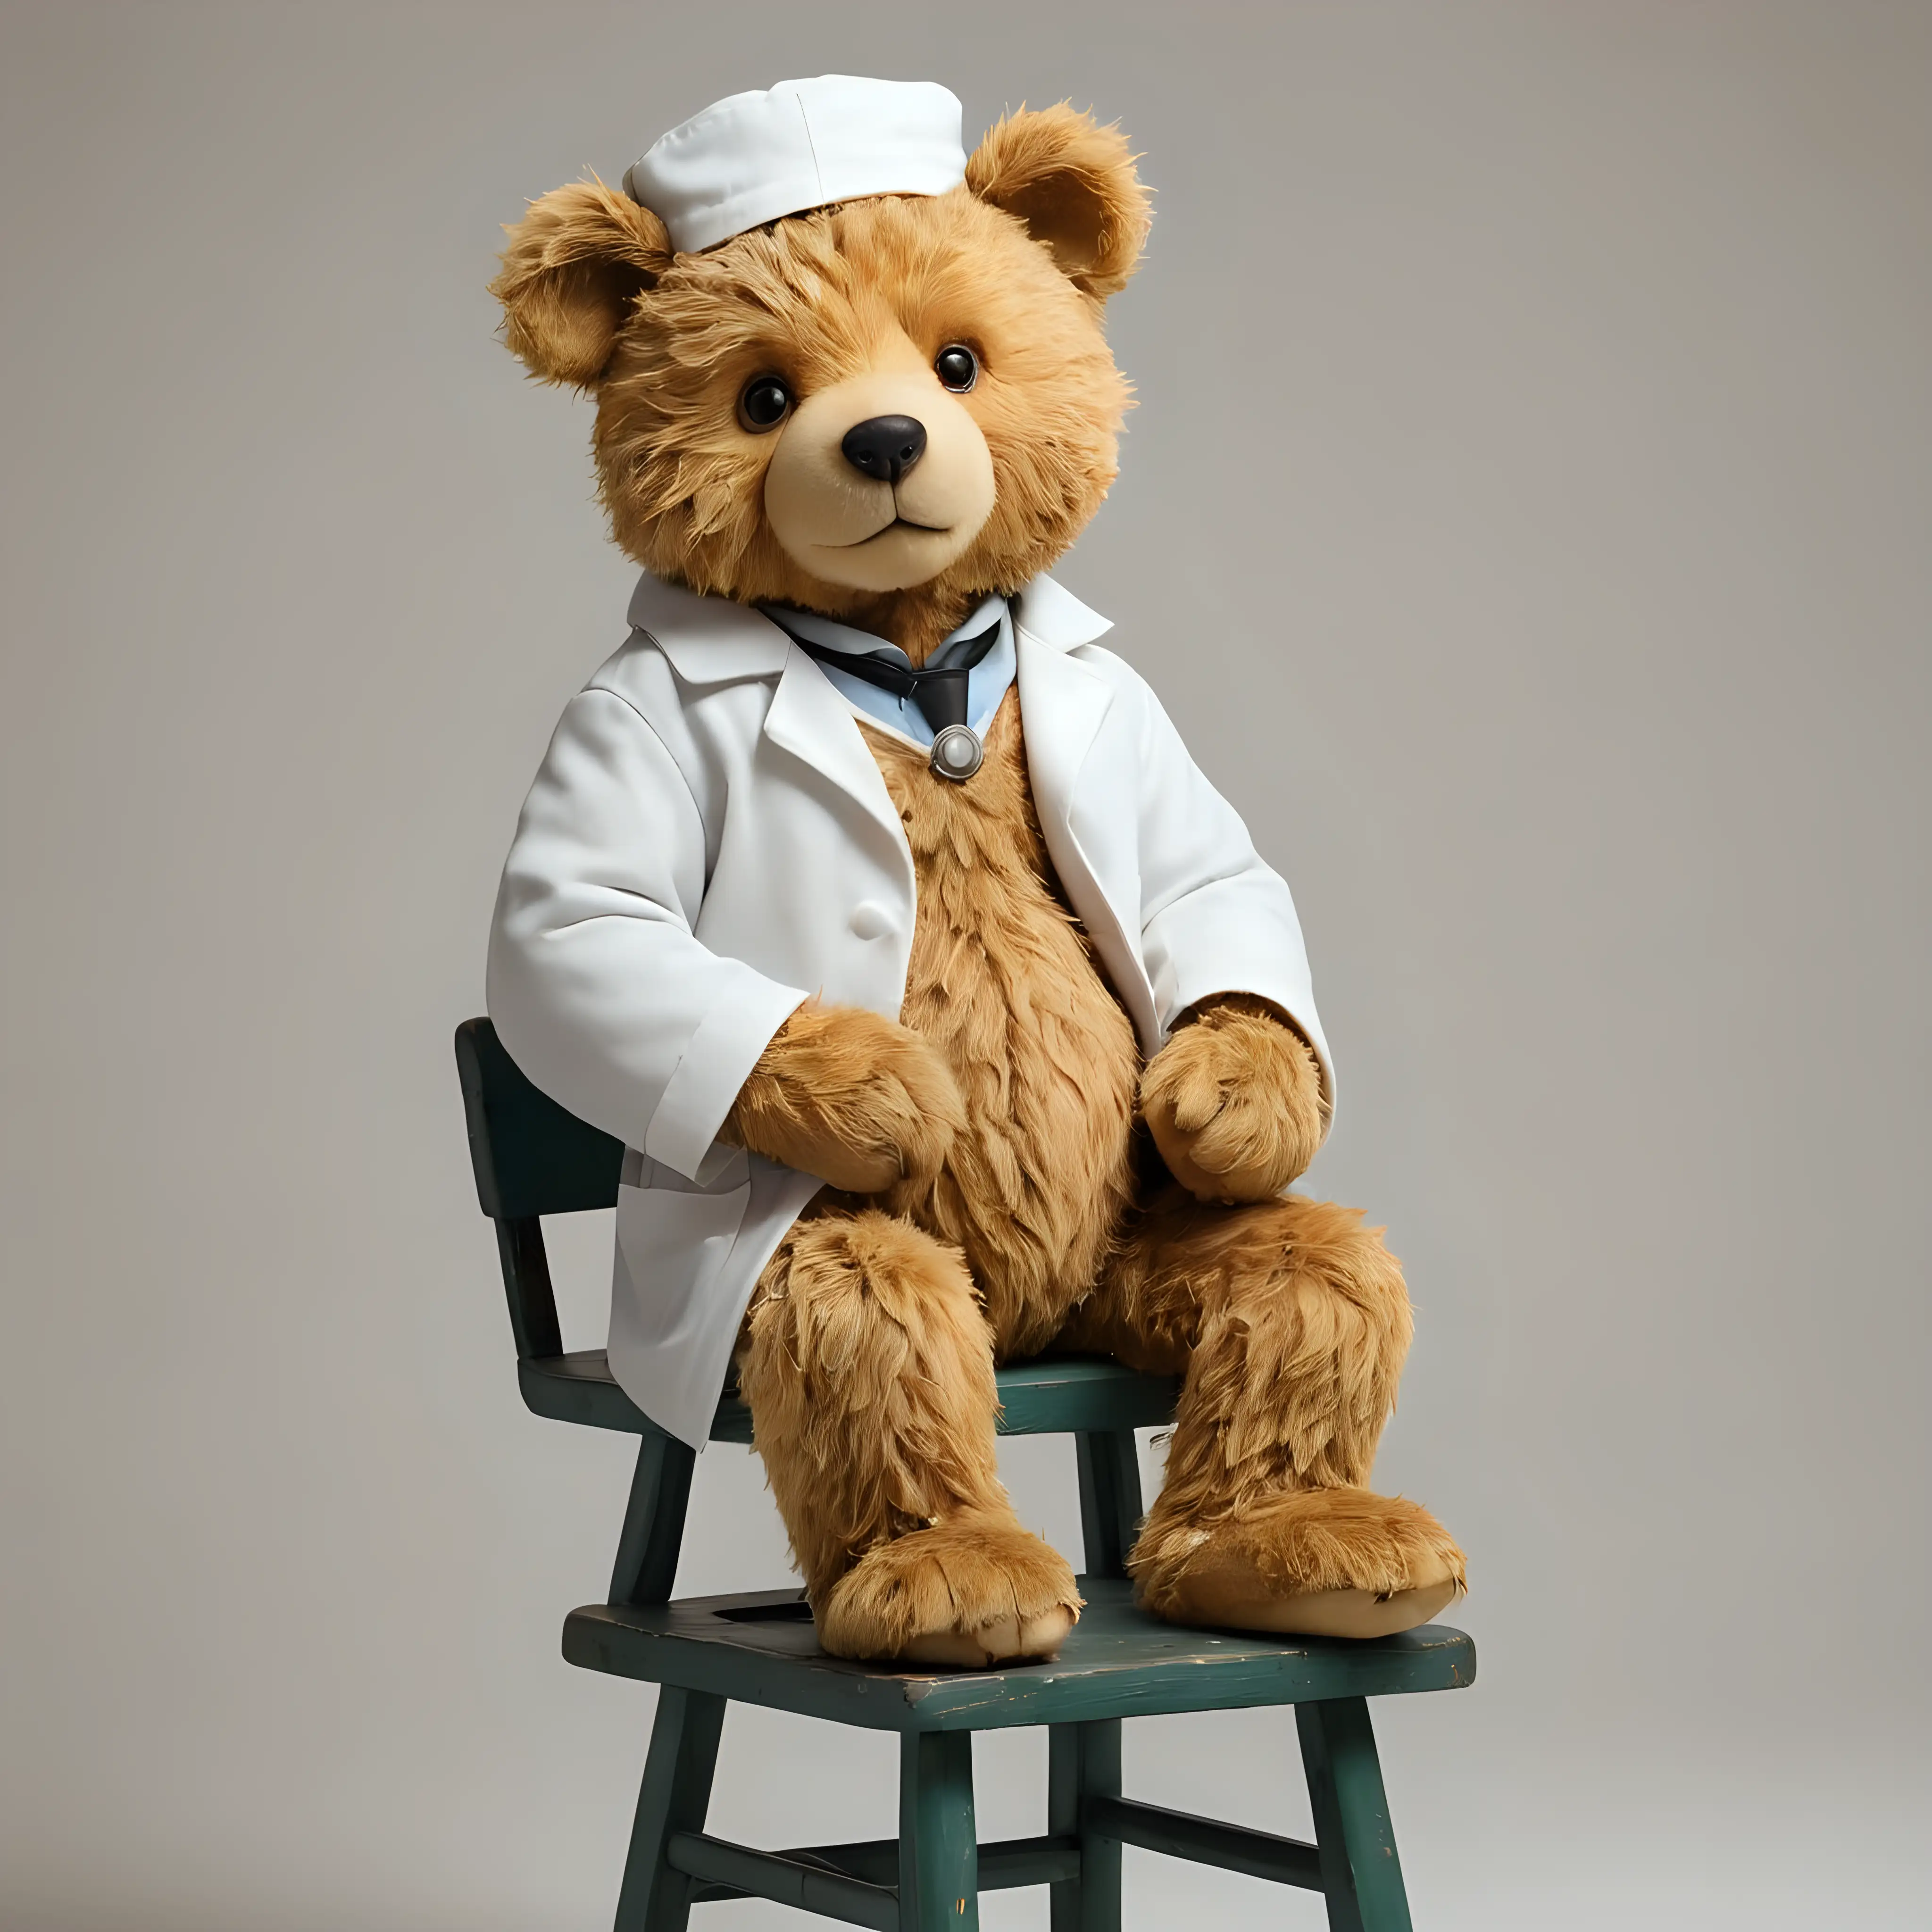 Battered old vintage Teddy Bear, sitting on a stool, dressed as a doctor with white coat and stethoscope around his neck, blank background